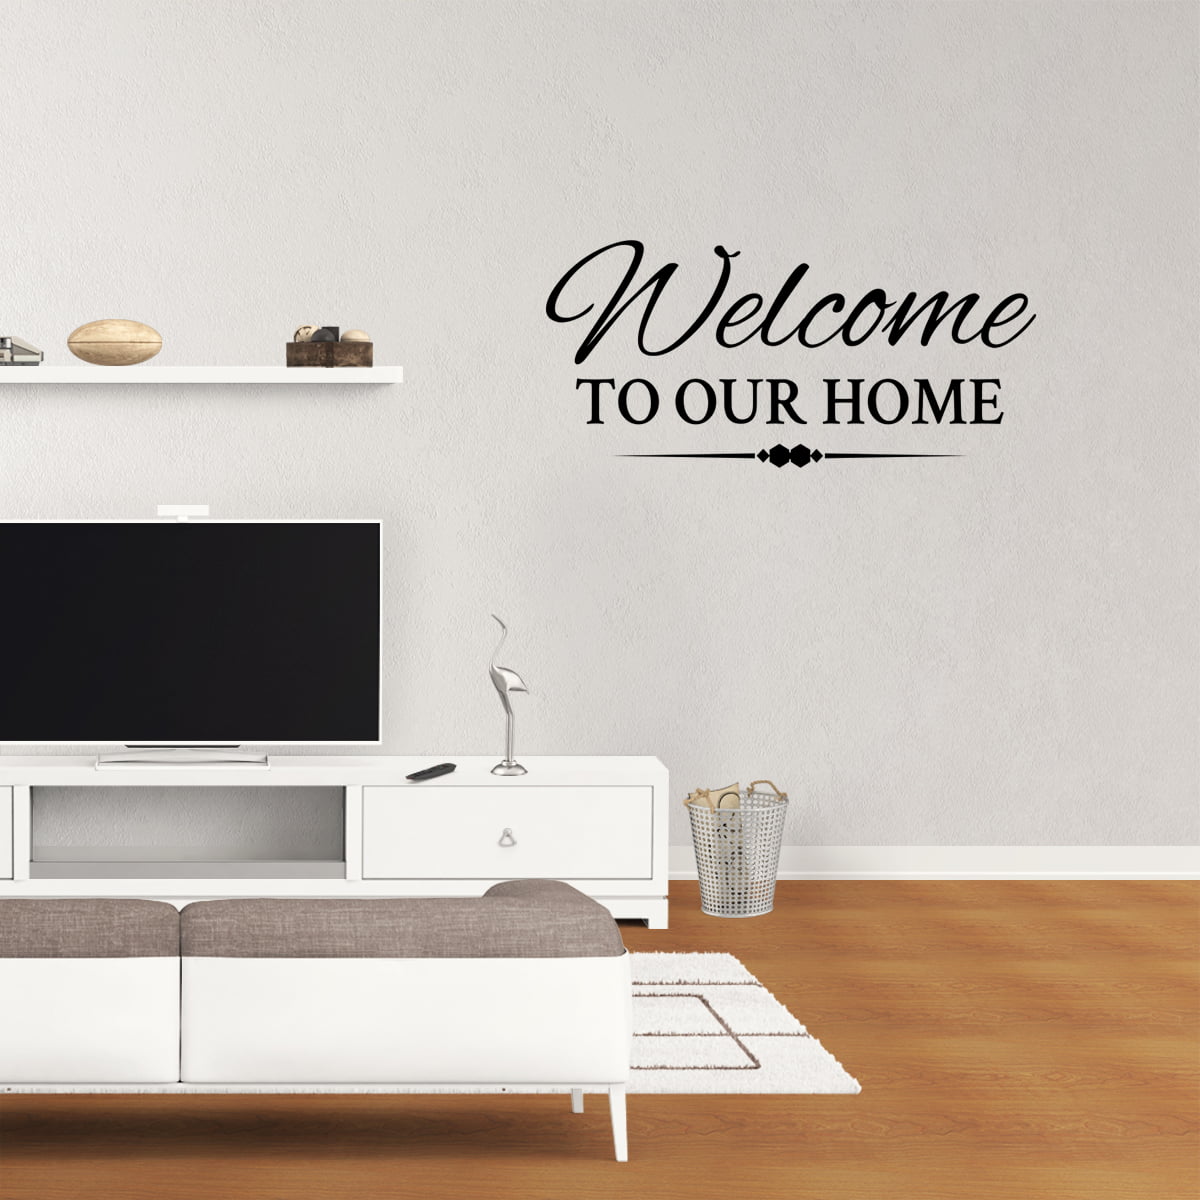 Welcome to Our Home wall decal mural wall quote sticker removable words decor 